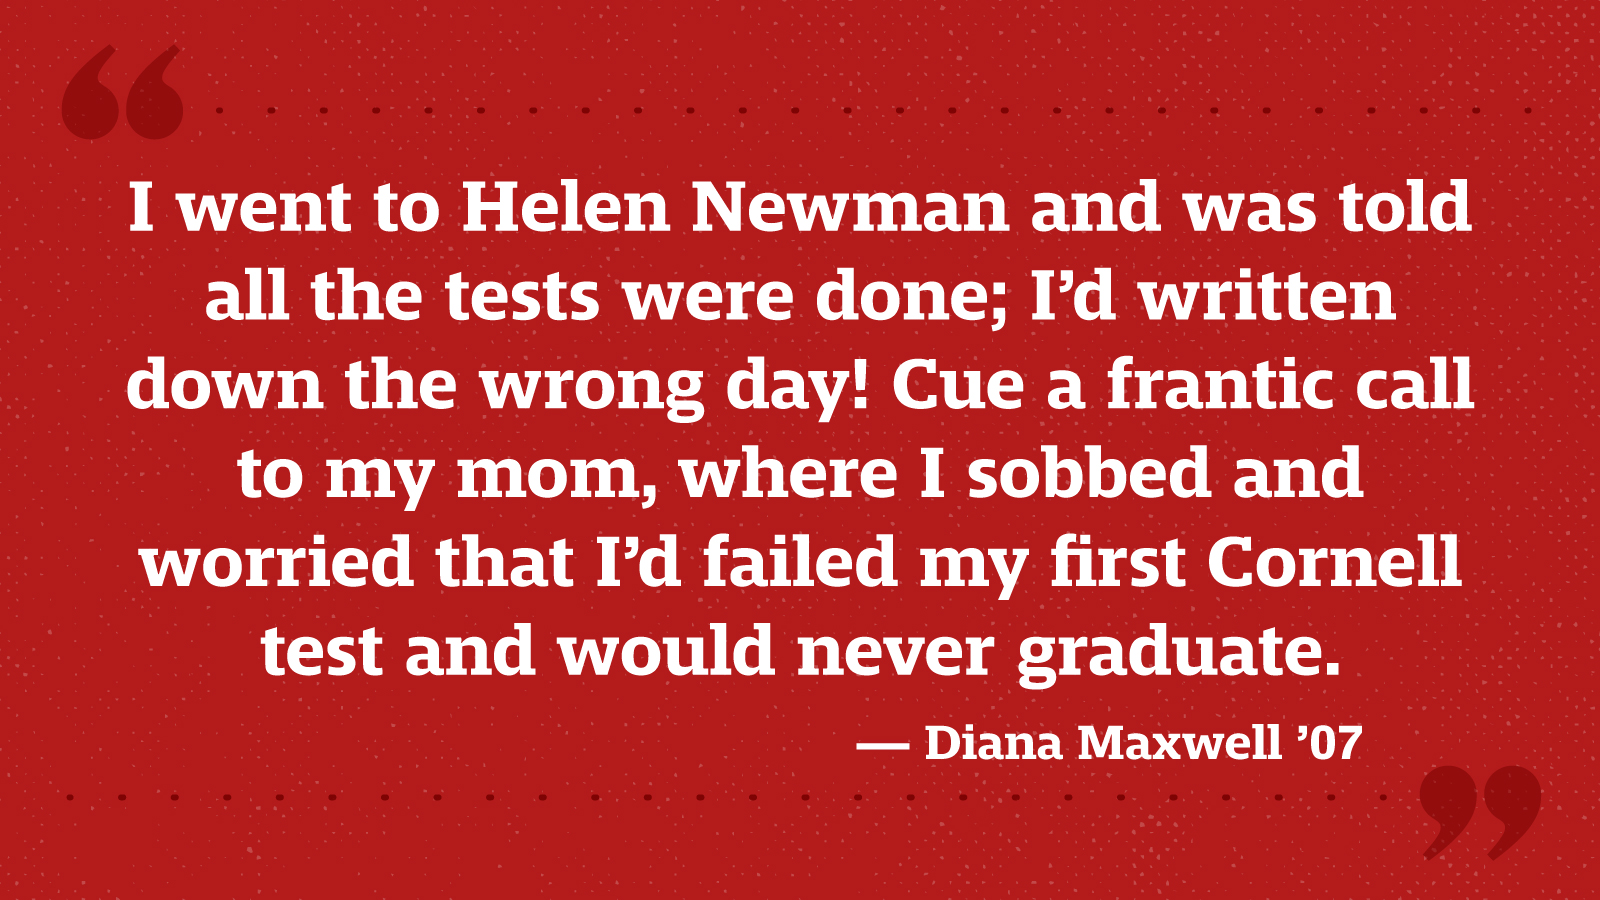 I went to Helen Newman and was told all the tests were done; I’d written down the wrong day! Cue a frantic call to my mom, where I sobbed and worried that I’d failed my first Cornell test and would never graduate. — Diana Maxwell ’07